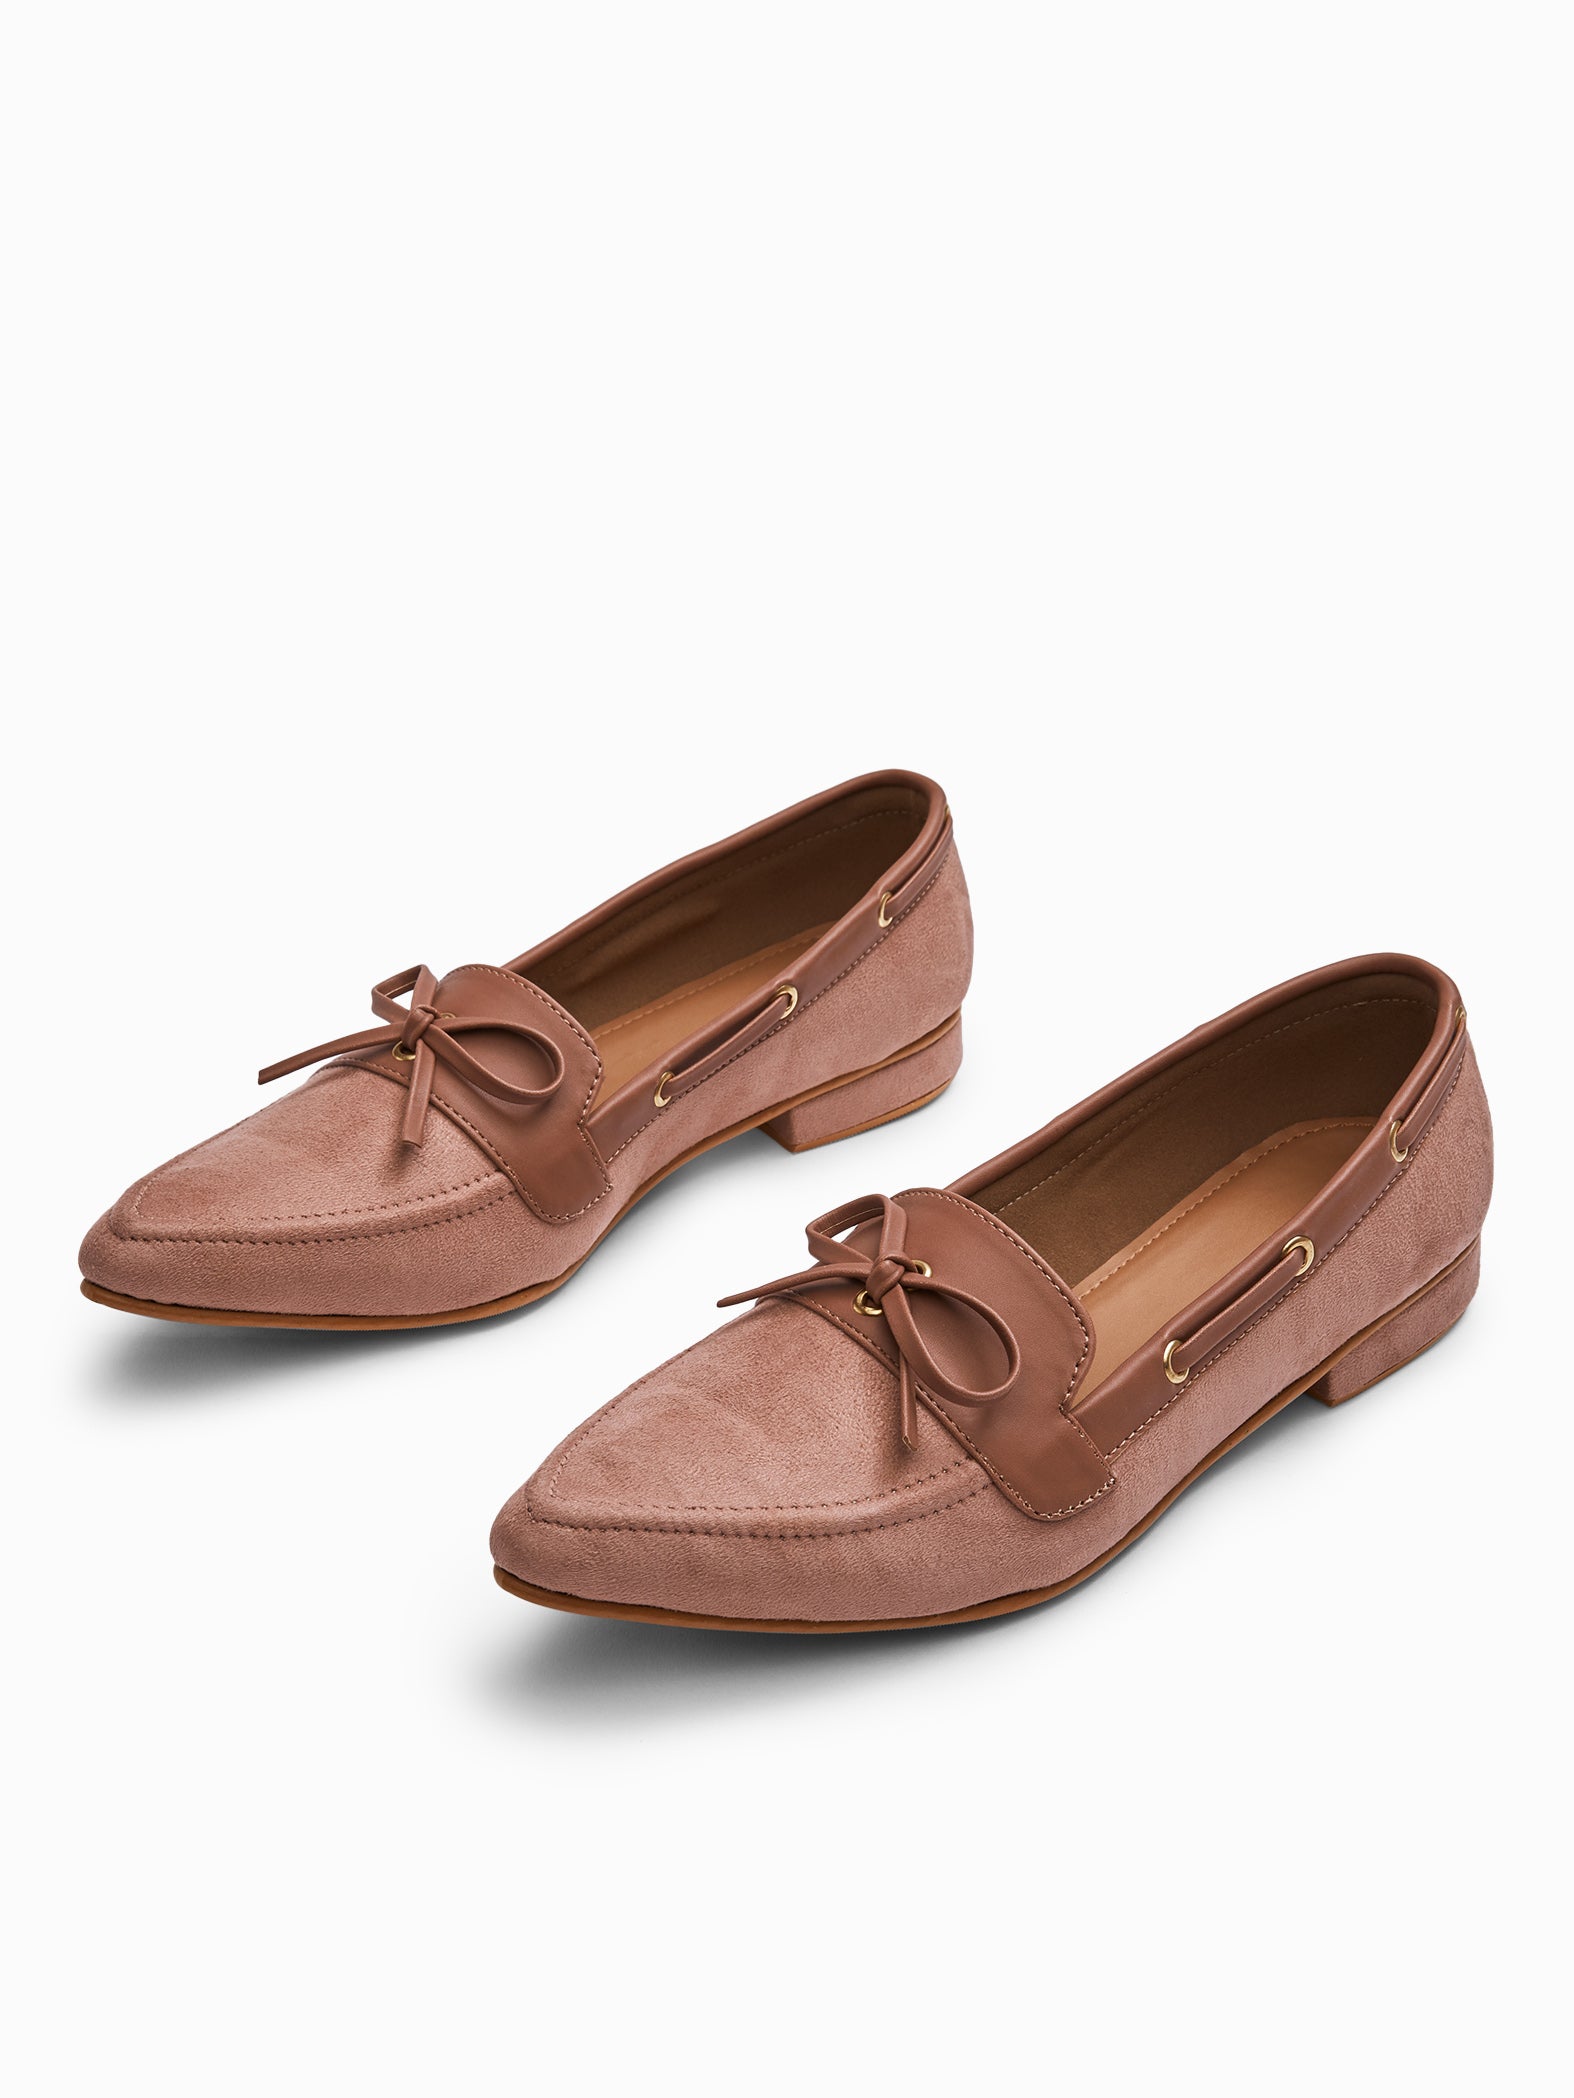 Blush Suede Pointed Loafers